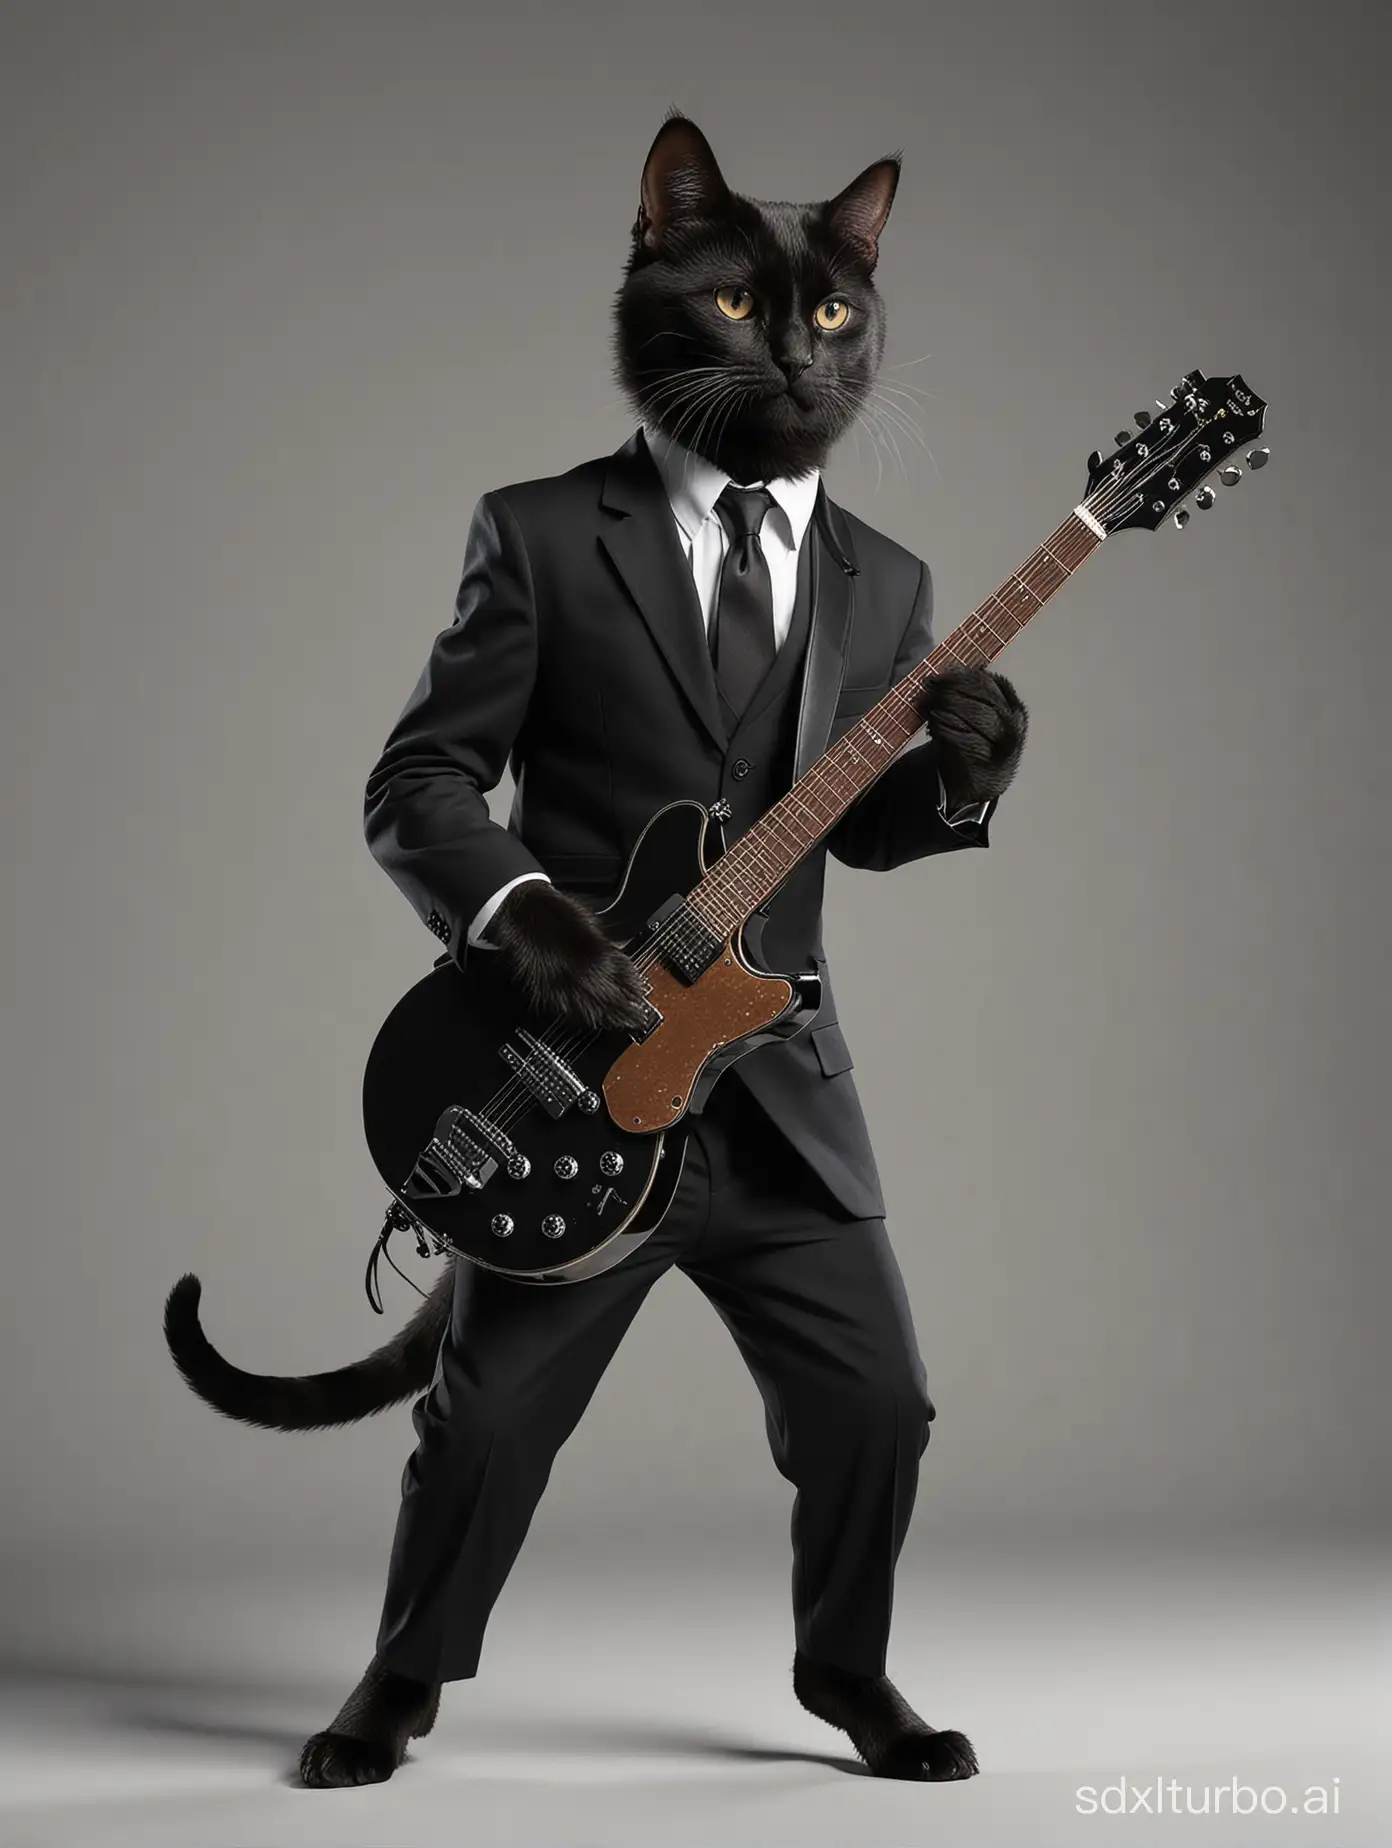 On a blank background is a full image of cat felinè in a black suit and tie wearing a black suit playing a Jazz guitar. High resolution ckean accurate photo rendering.